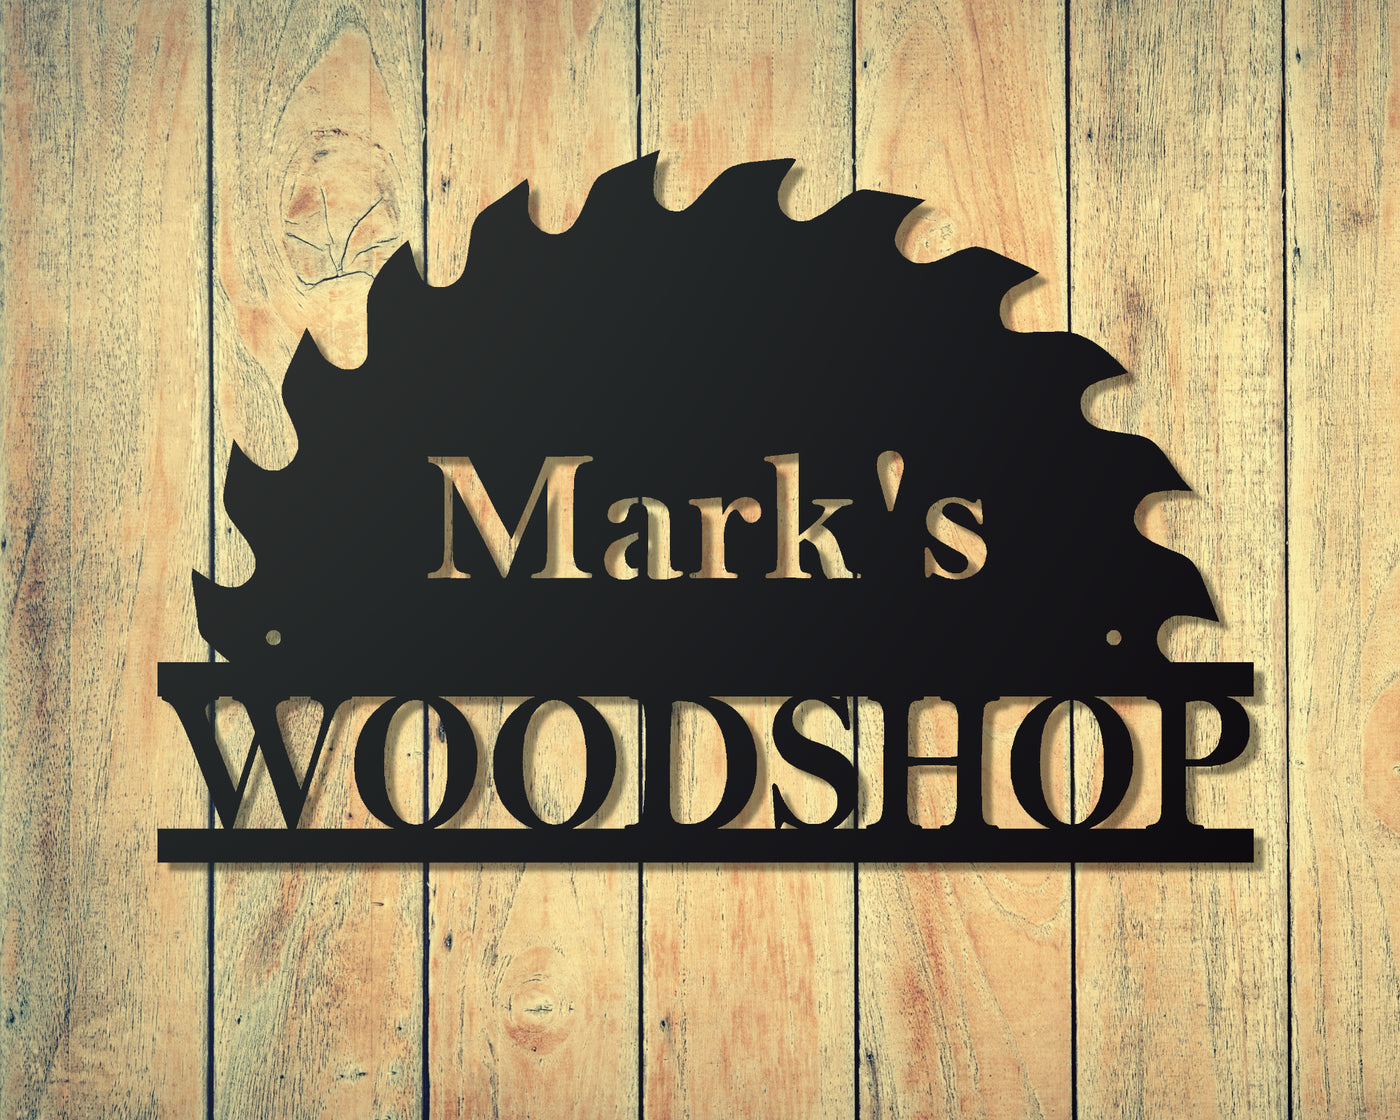 Personalized Woodshop Saw Metal Sign - Madison Iron and Wood - Personalized sign - metal outdoor decor - Steel deocrations - american made products - veteran owned business products - fencing decorations - fencing supplies - custom wall decorations - personalized wall signs - steel - decorative post caps - steel post caps - metal post caps - brackets - structural brackets - home improvement - easter - easter decorations - easter gift - easter yard decor